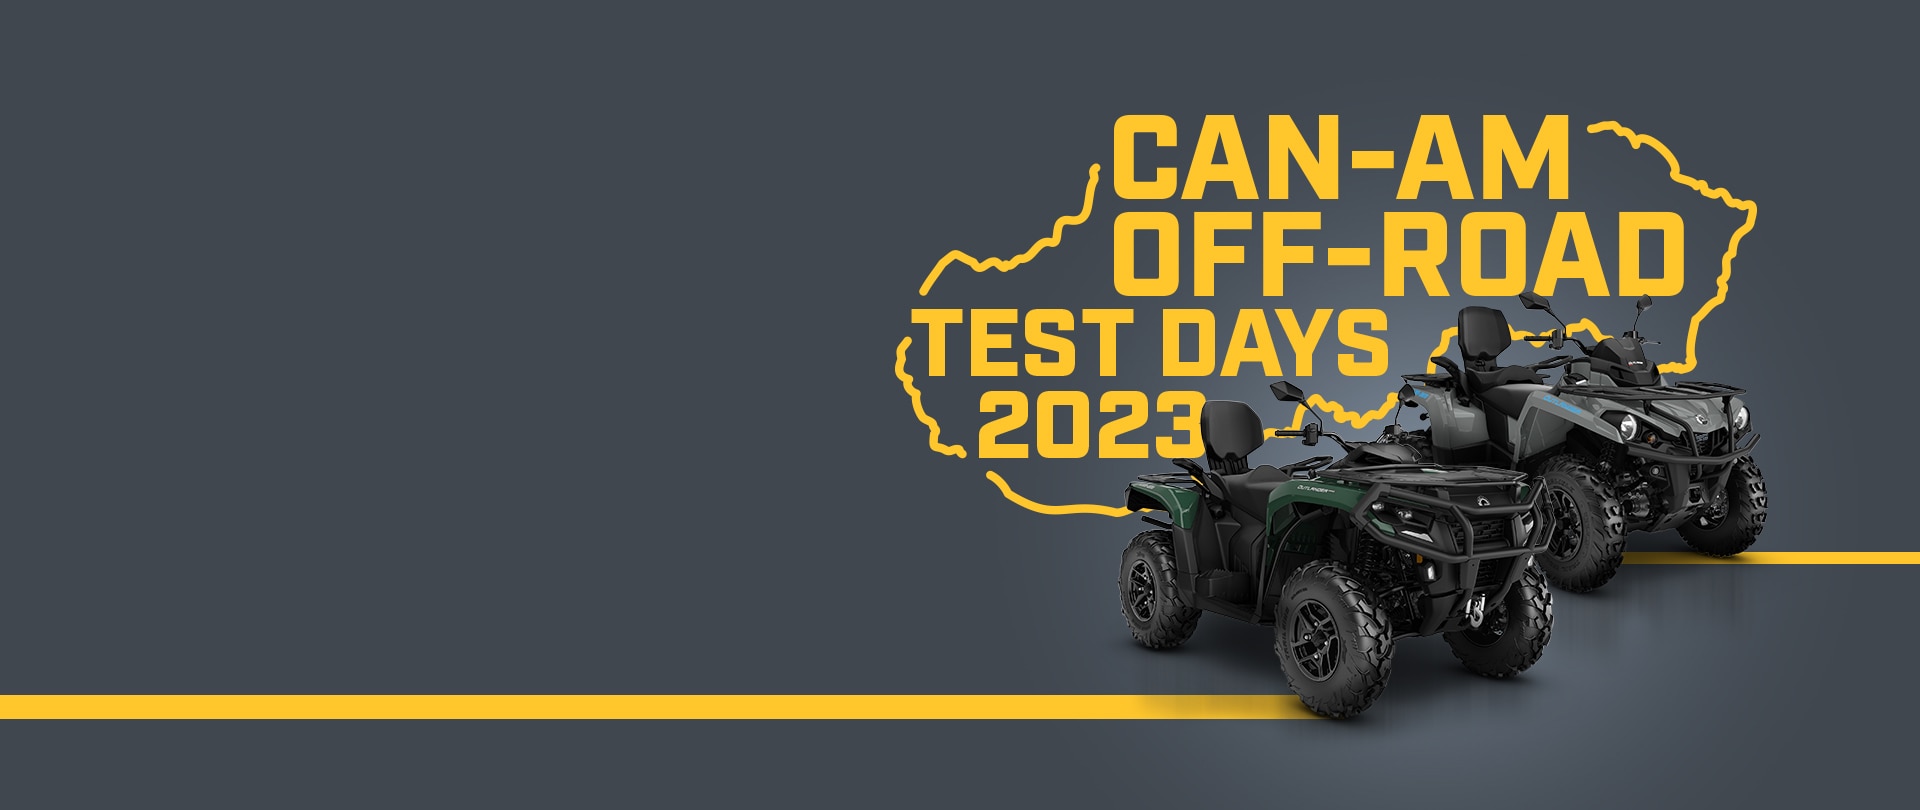 CAN-AM OFF-ROAD TEST DAYS 2023